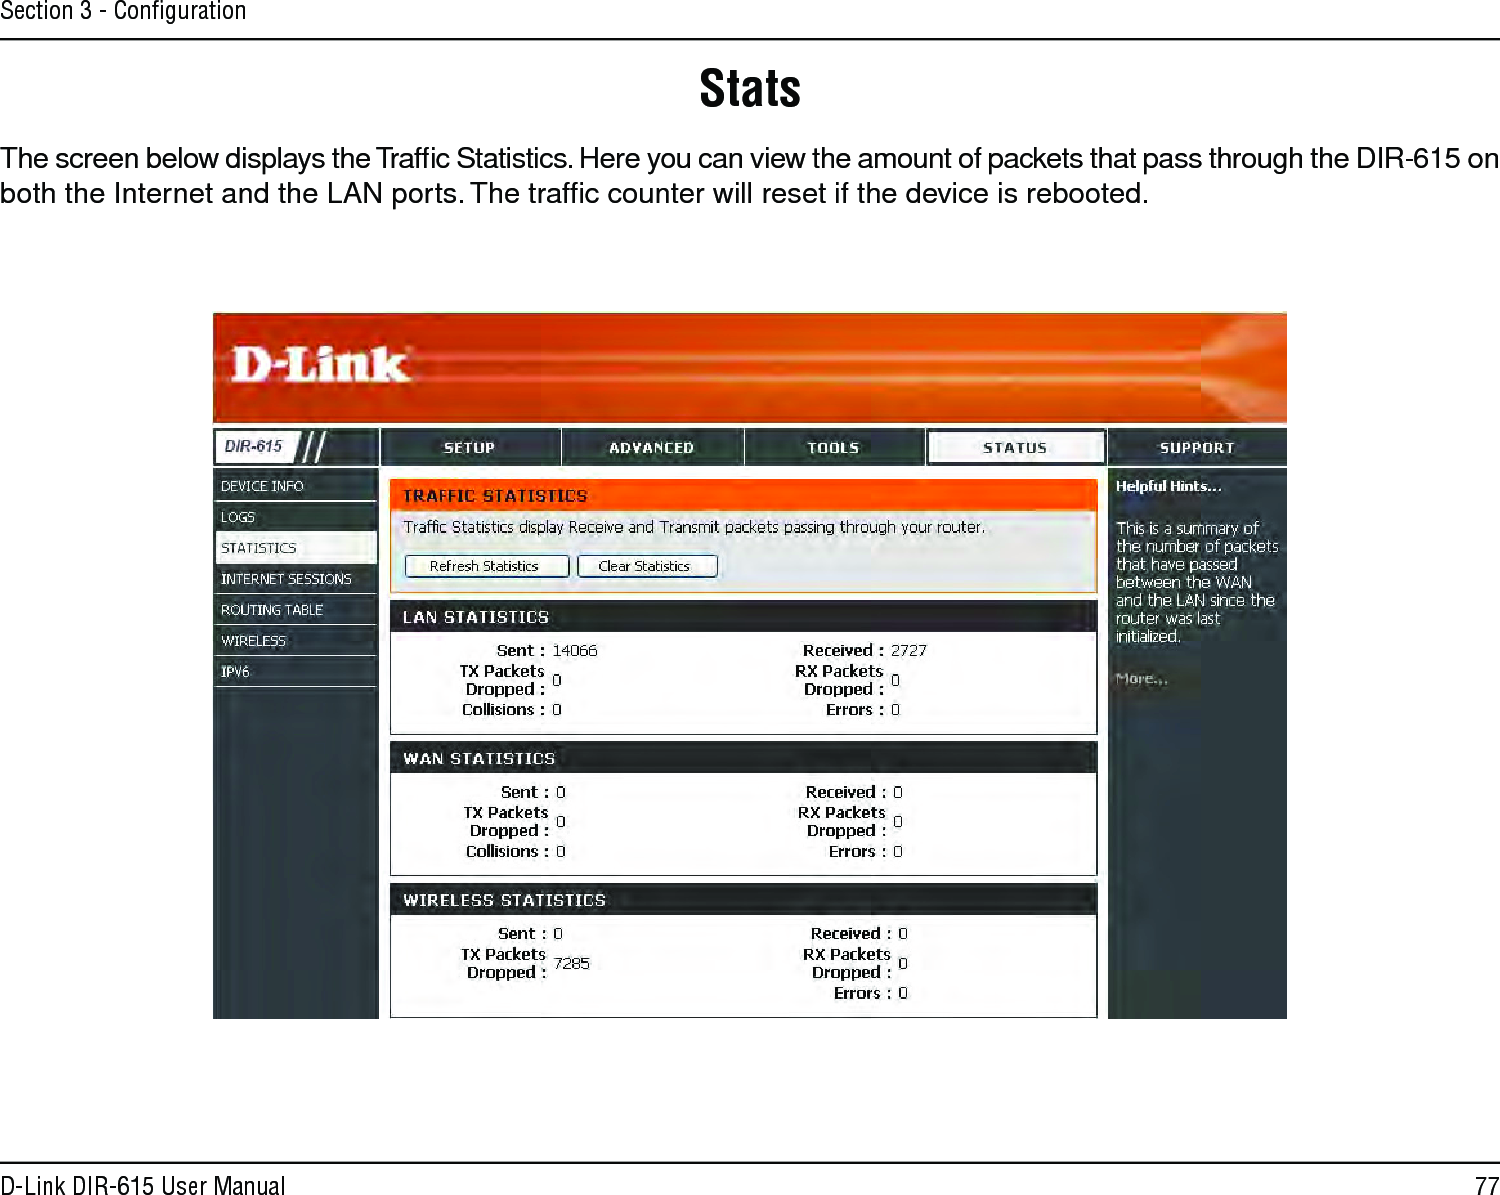 77D-Link DIR-615 User ManualSection 3 - ConﬁgurationStatsThe screen below displays the Trafﬁc Statistics. Here you can view the amount of packets that pass through the DIR-615 on both the Internet and the LAN ports. The trafﬁc counter will reset if the device is rebooted.